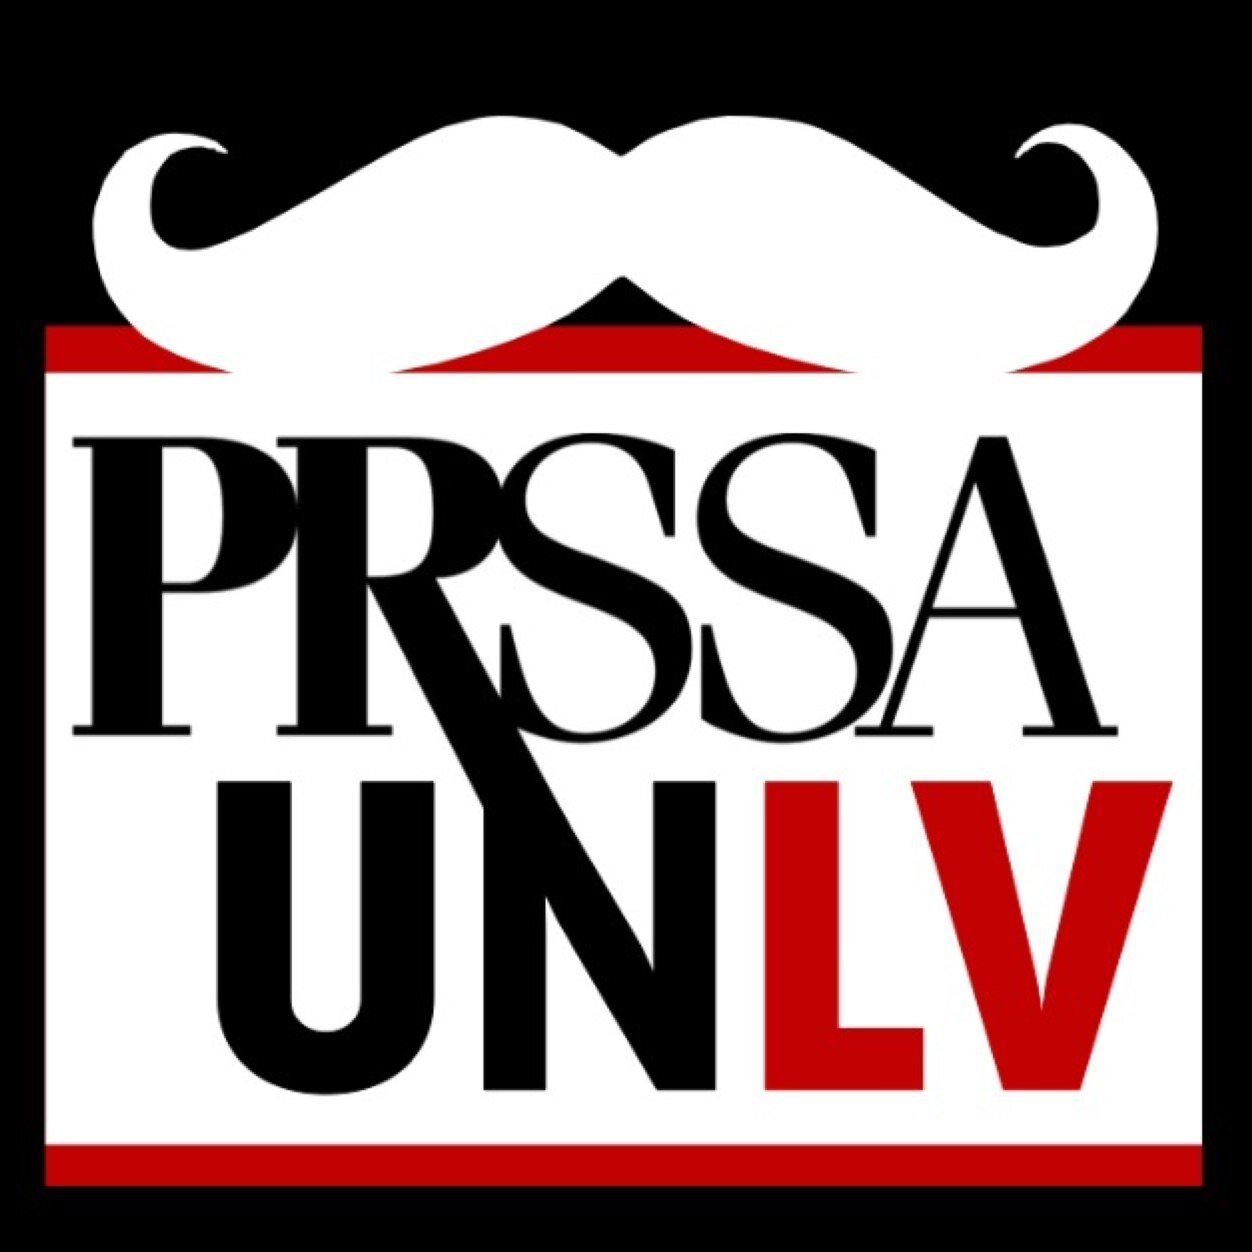 The official Twitter account for the PRSSA UNLV chapter